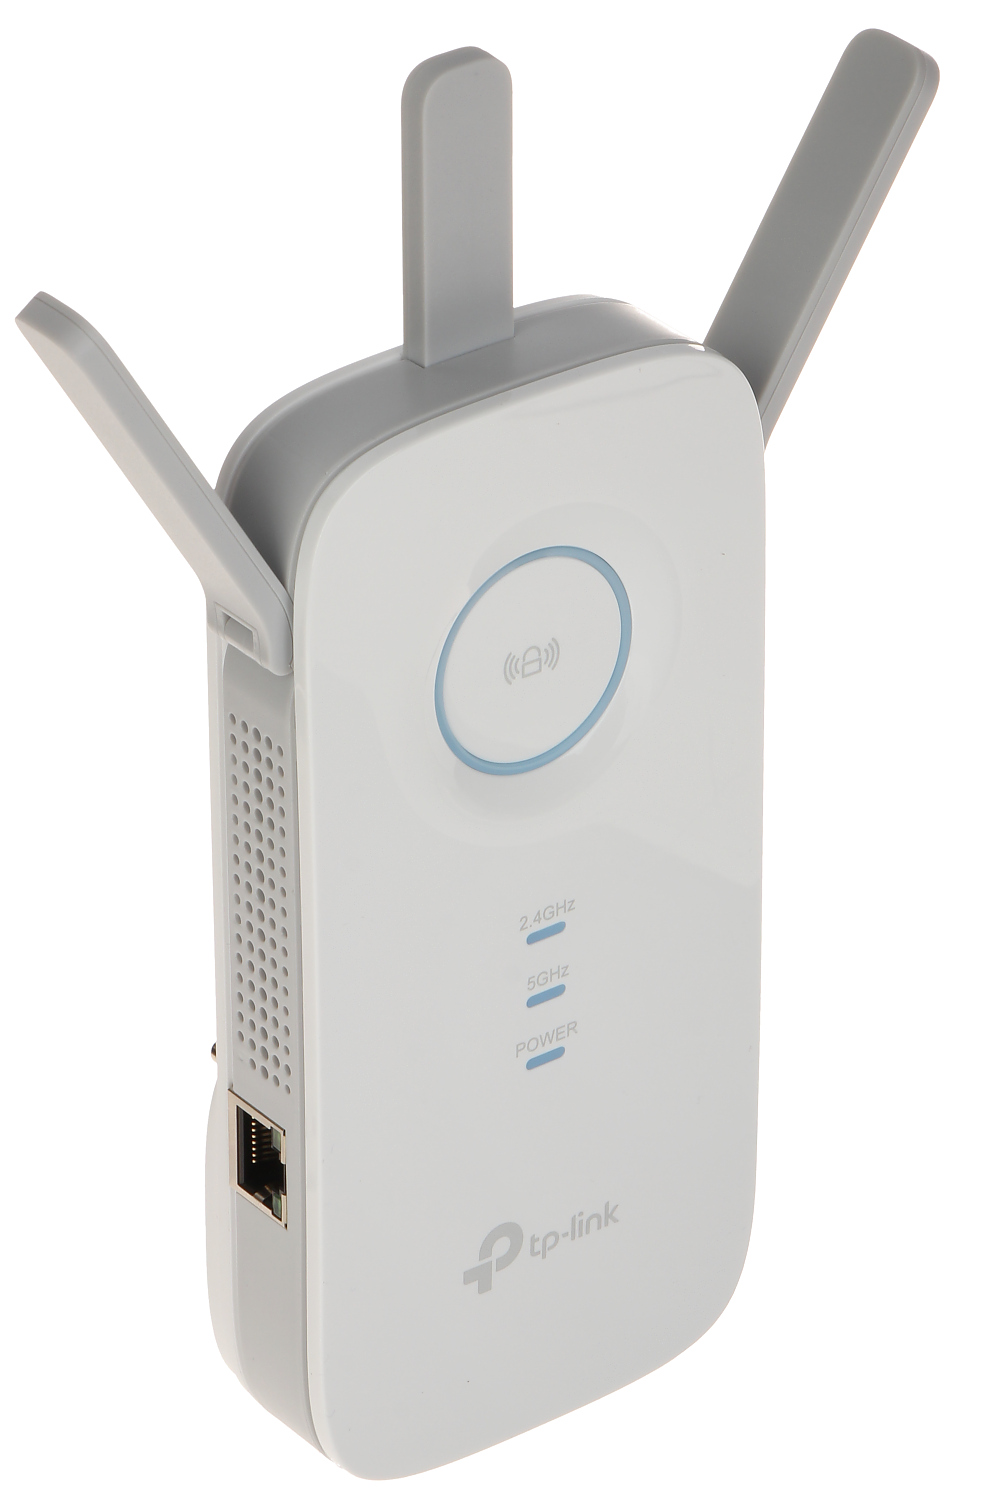 UNIVERSAL WI-FI RANGE EXTENDER TL-RE450 2.4 GHz, 5 GHz... - Other Devices -  Delta